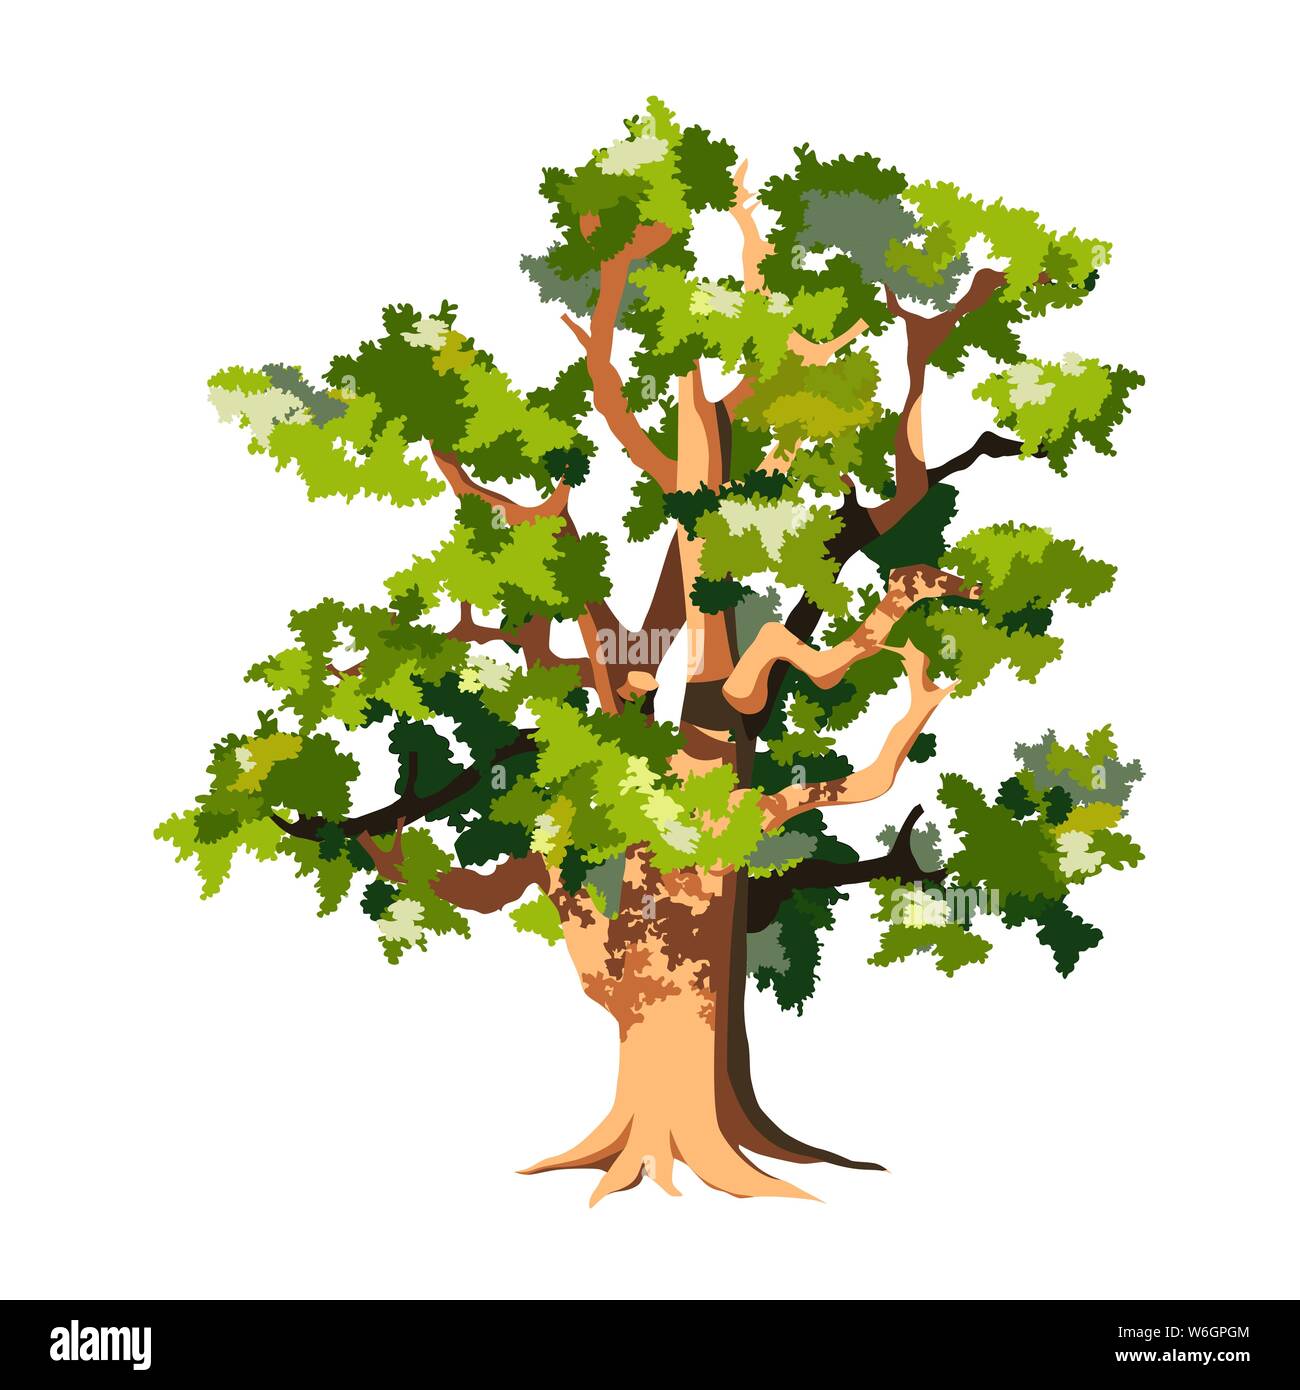 Old big oak tree isolated on white background. Lush foliage, curved branches, cartoon vector illustration. Stock Vector